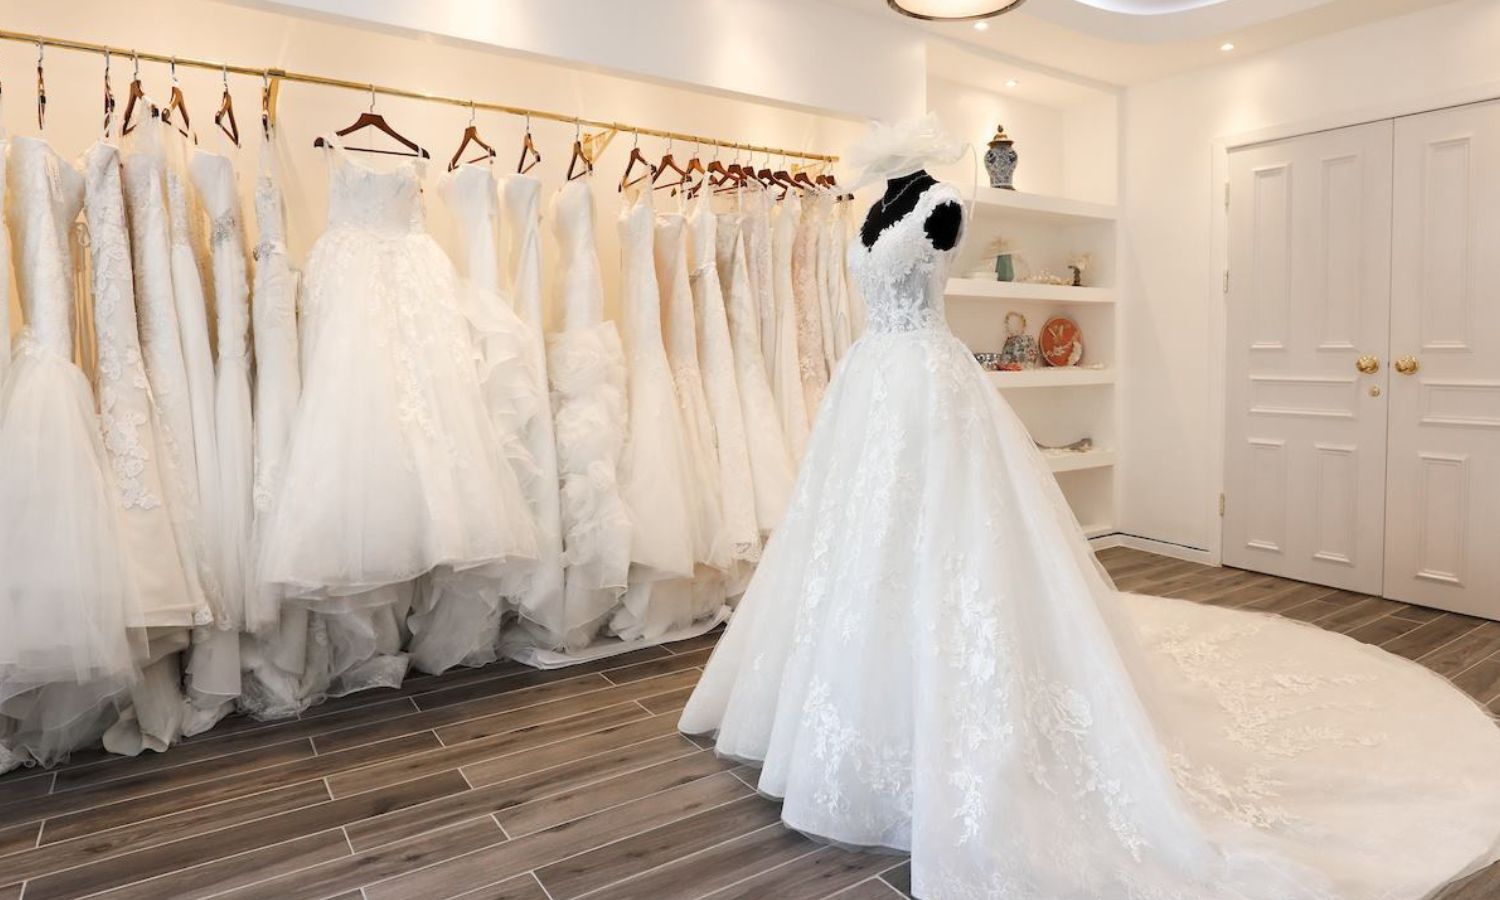 Wedding dresses hanging in one of their design and sale stores.